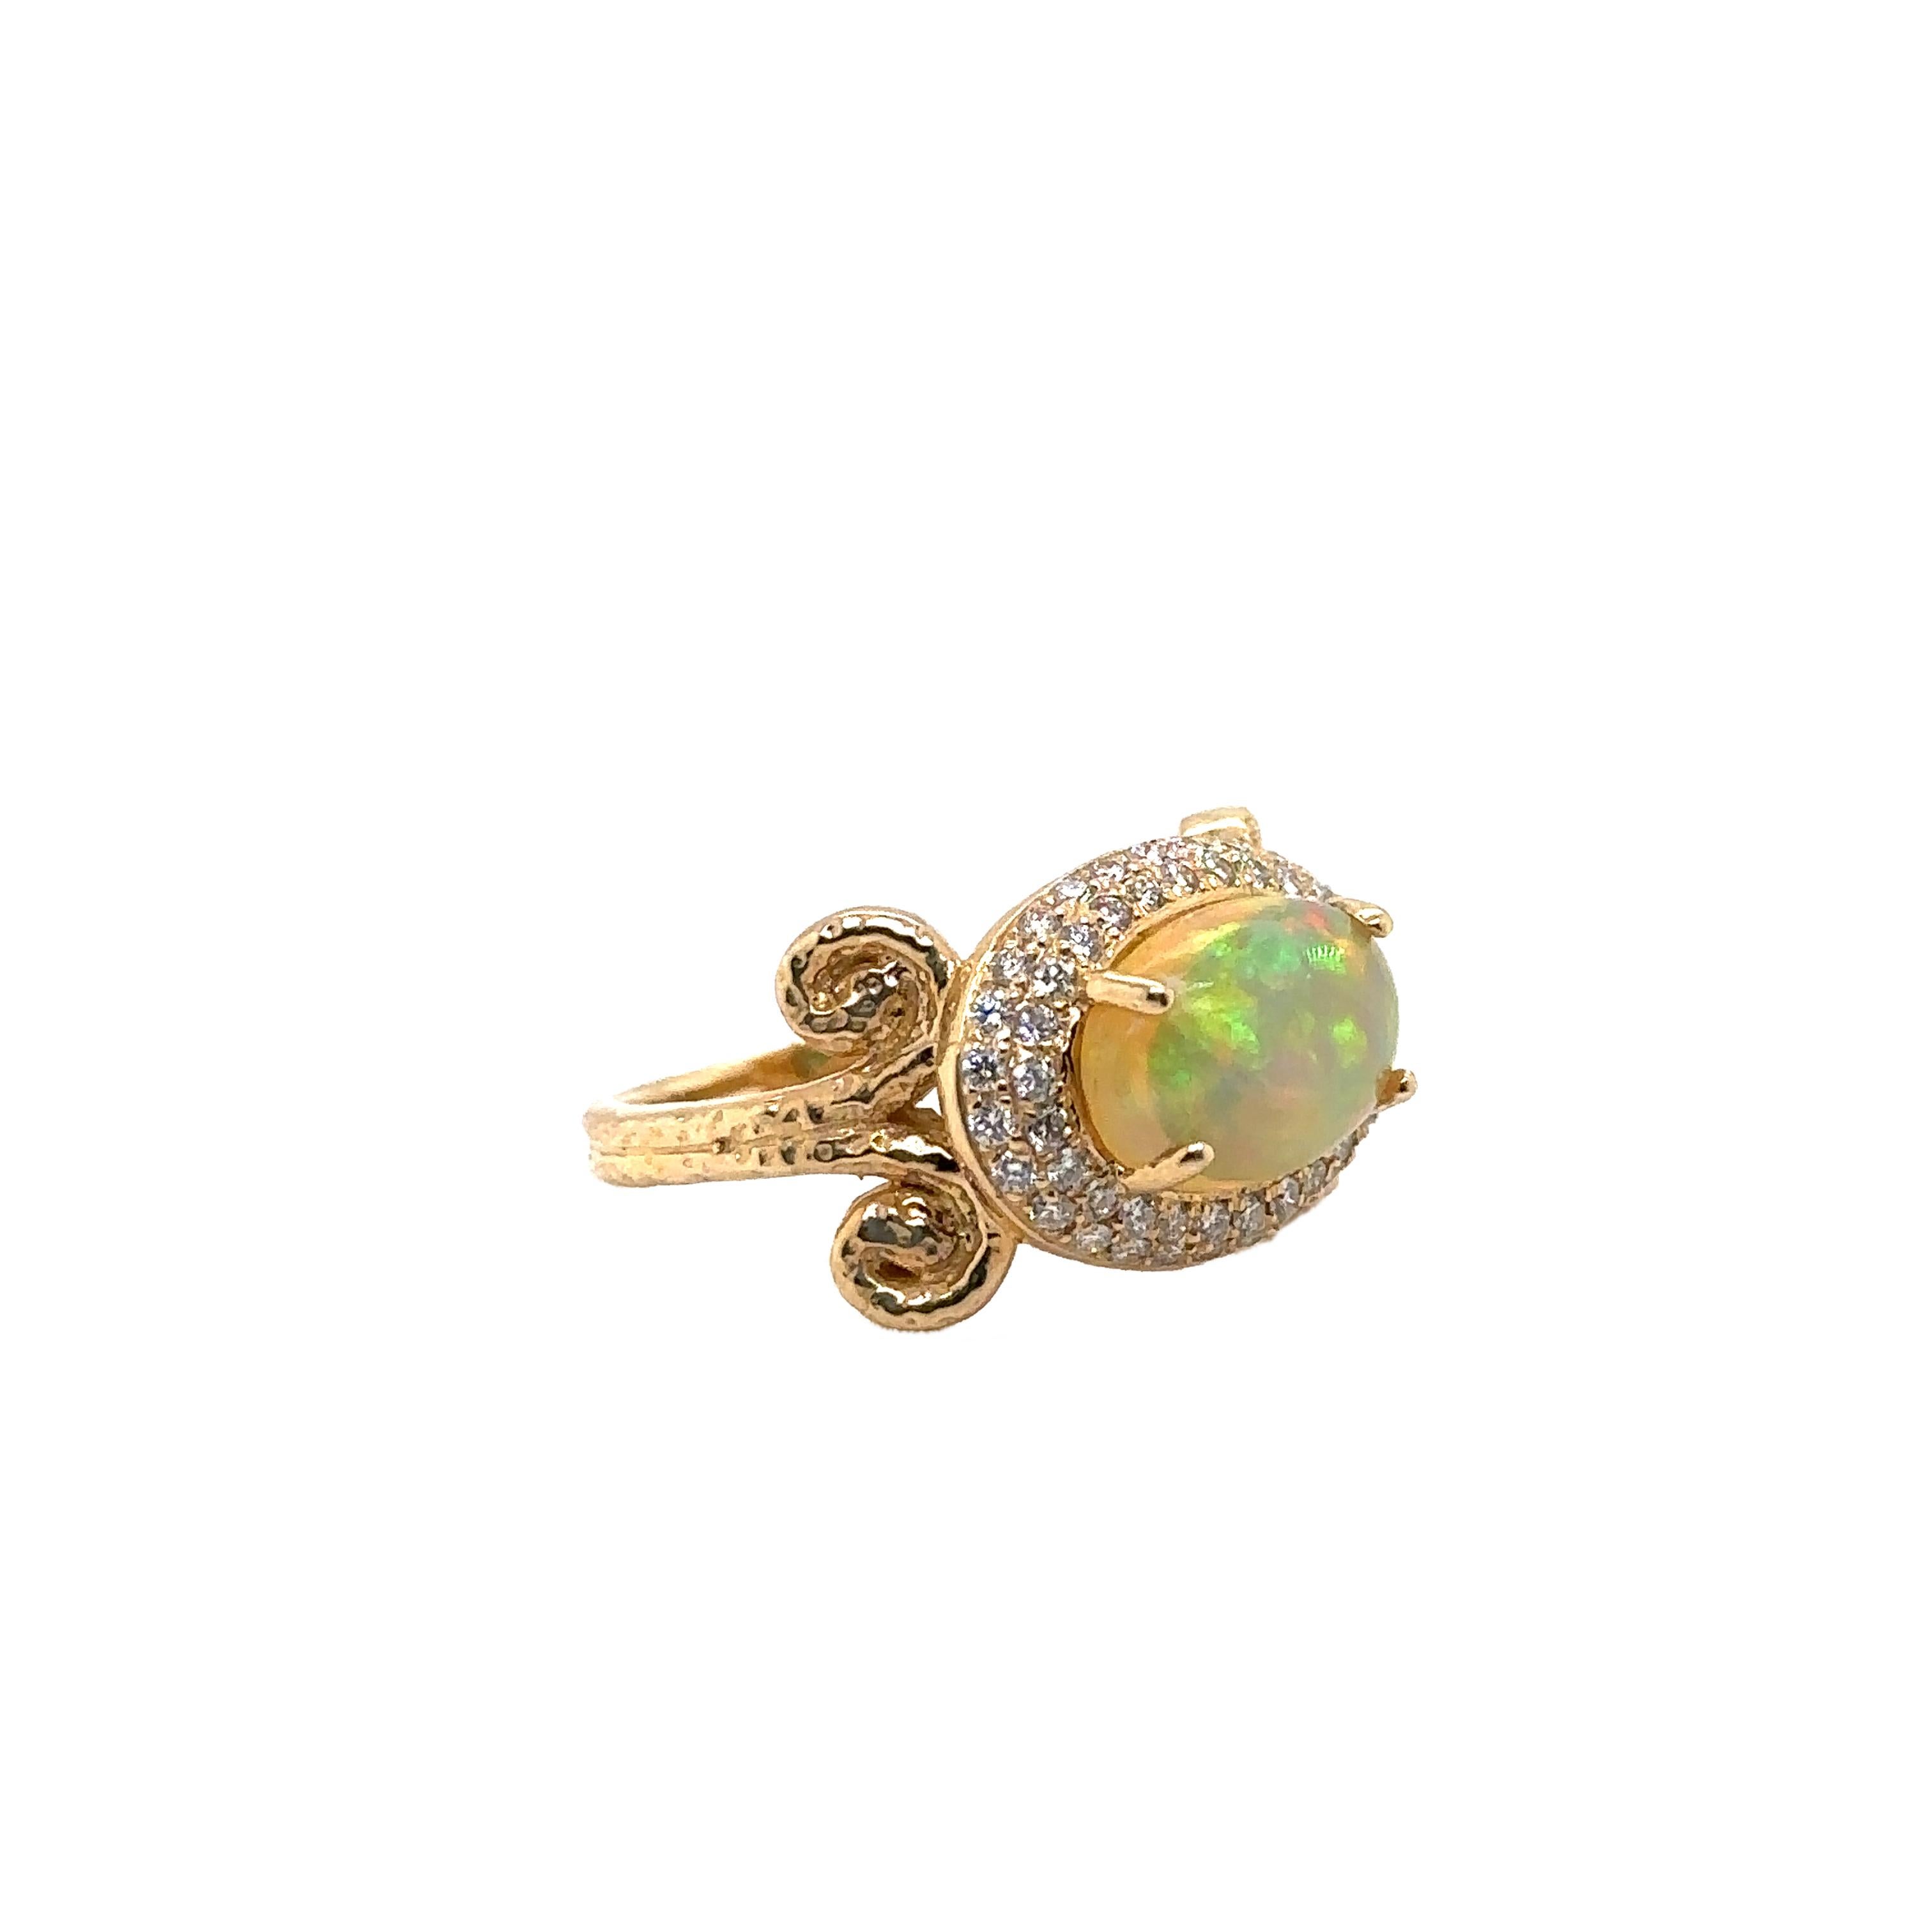 Oval Cut JAS-21-2249 - 14K YG 0.55Ct G/H SI1 DIAMONDS & 12X8MM 4.50Ct ETHIOPIAN OPAL  For Sale